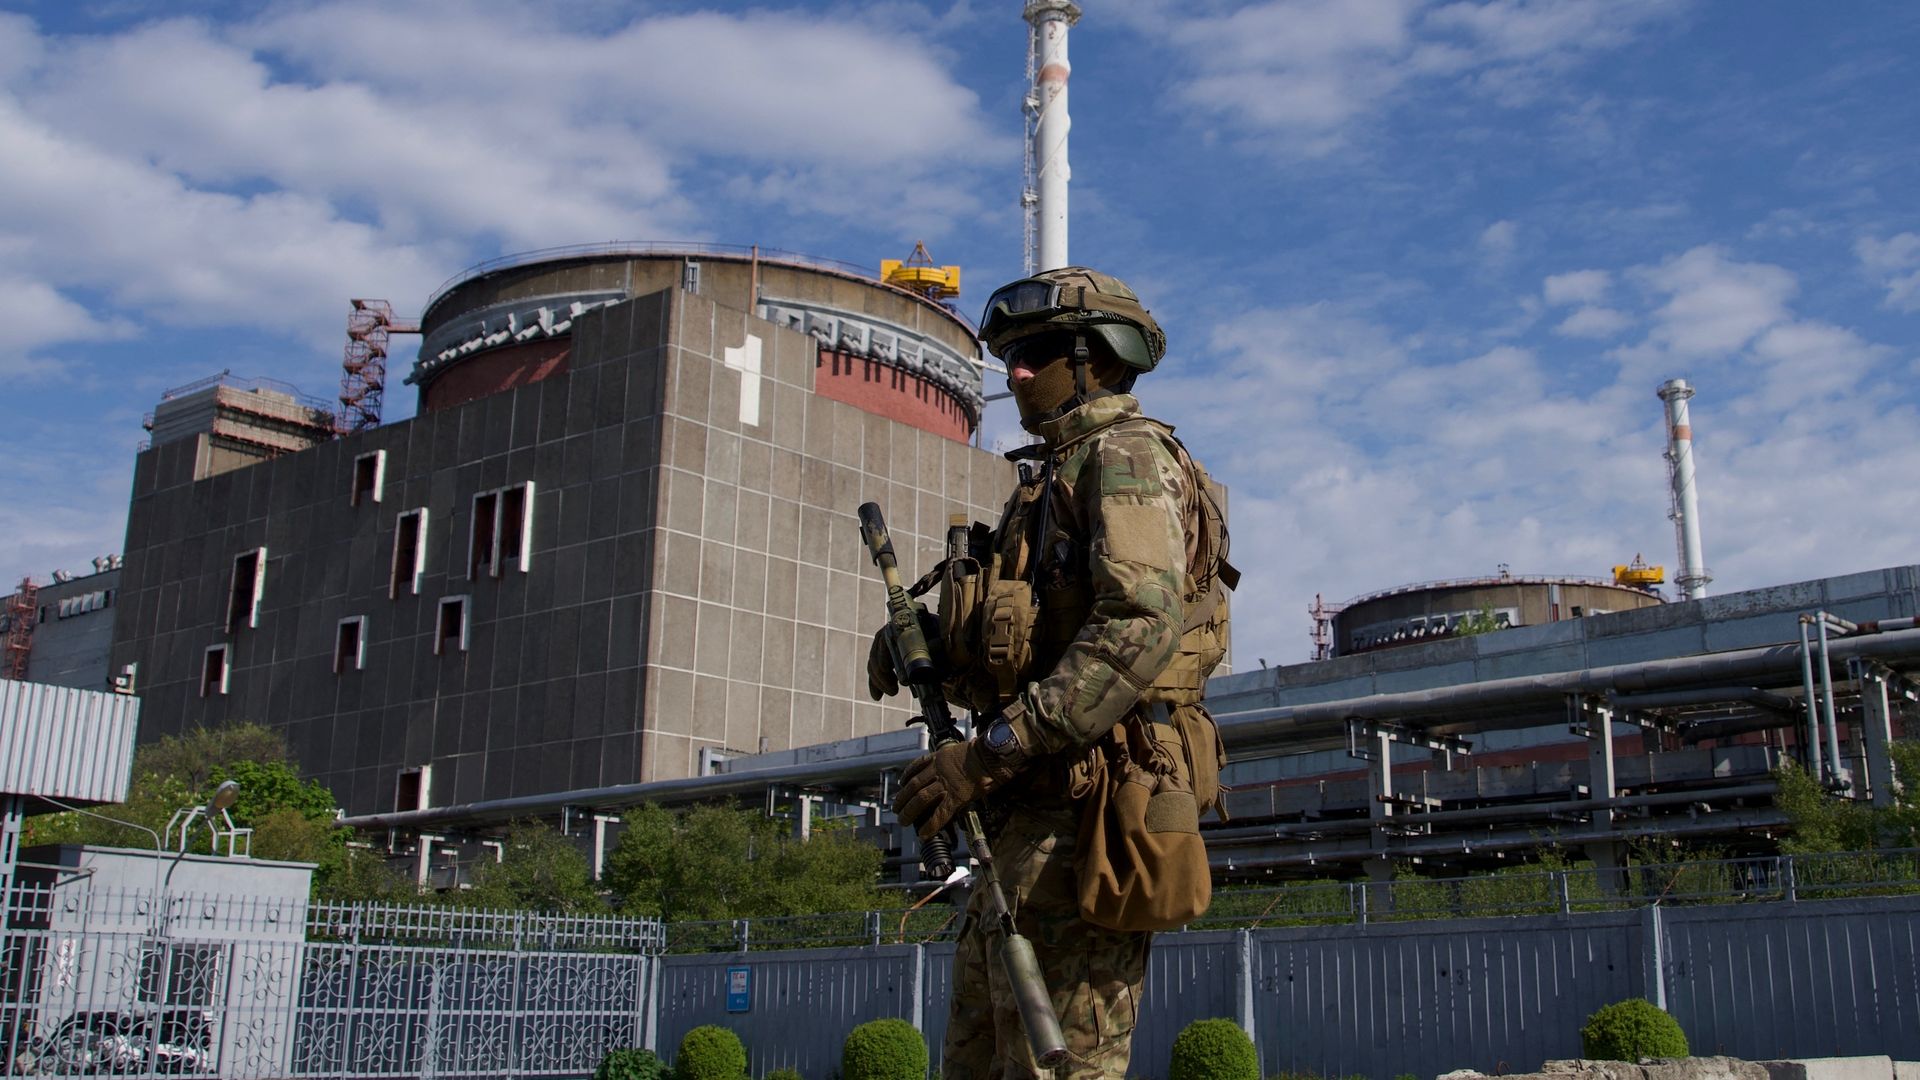 A Russian soldier near Ukraine's Zaporizhzhia nuclear power station in the town of Energodar in May 2022.